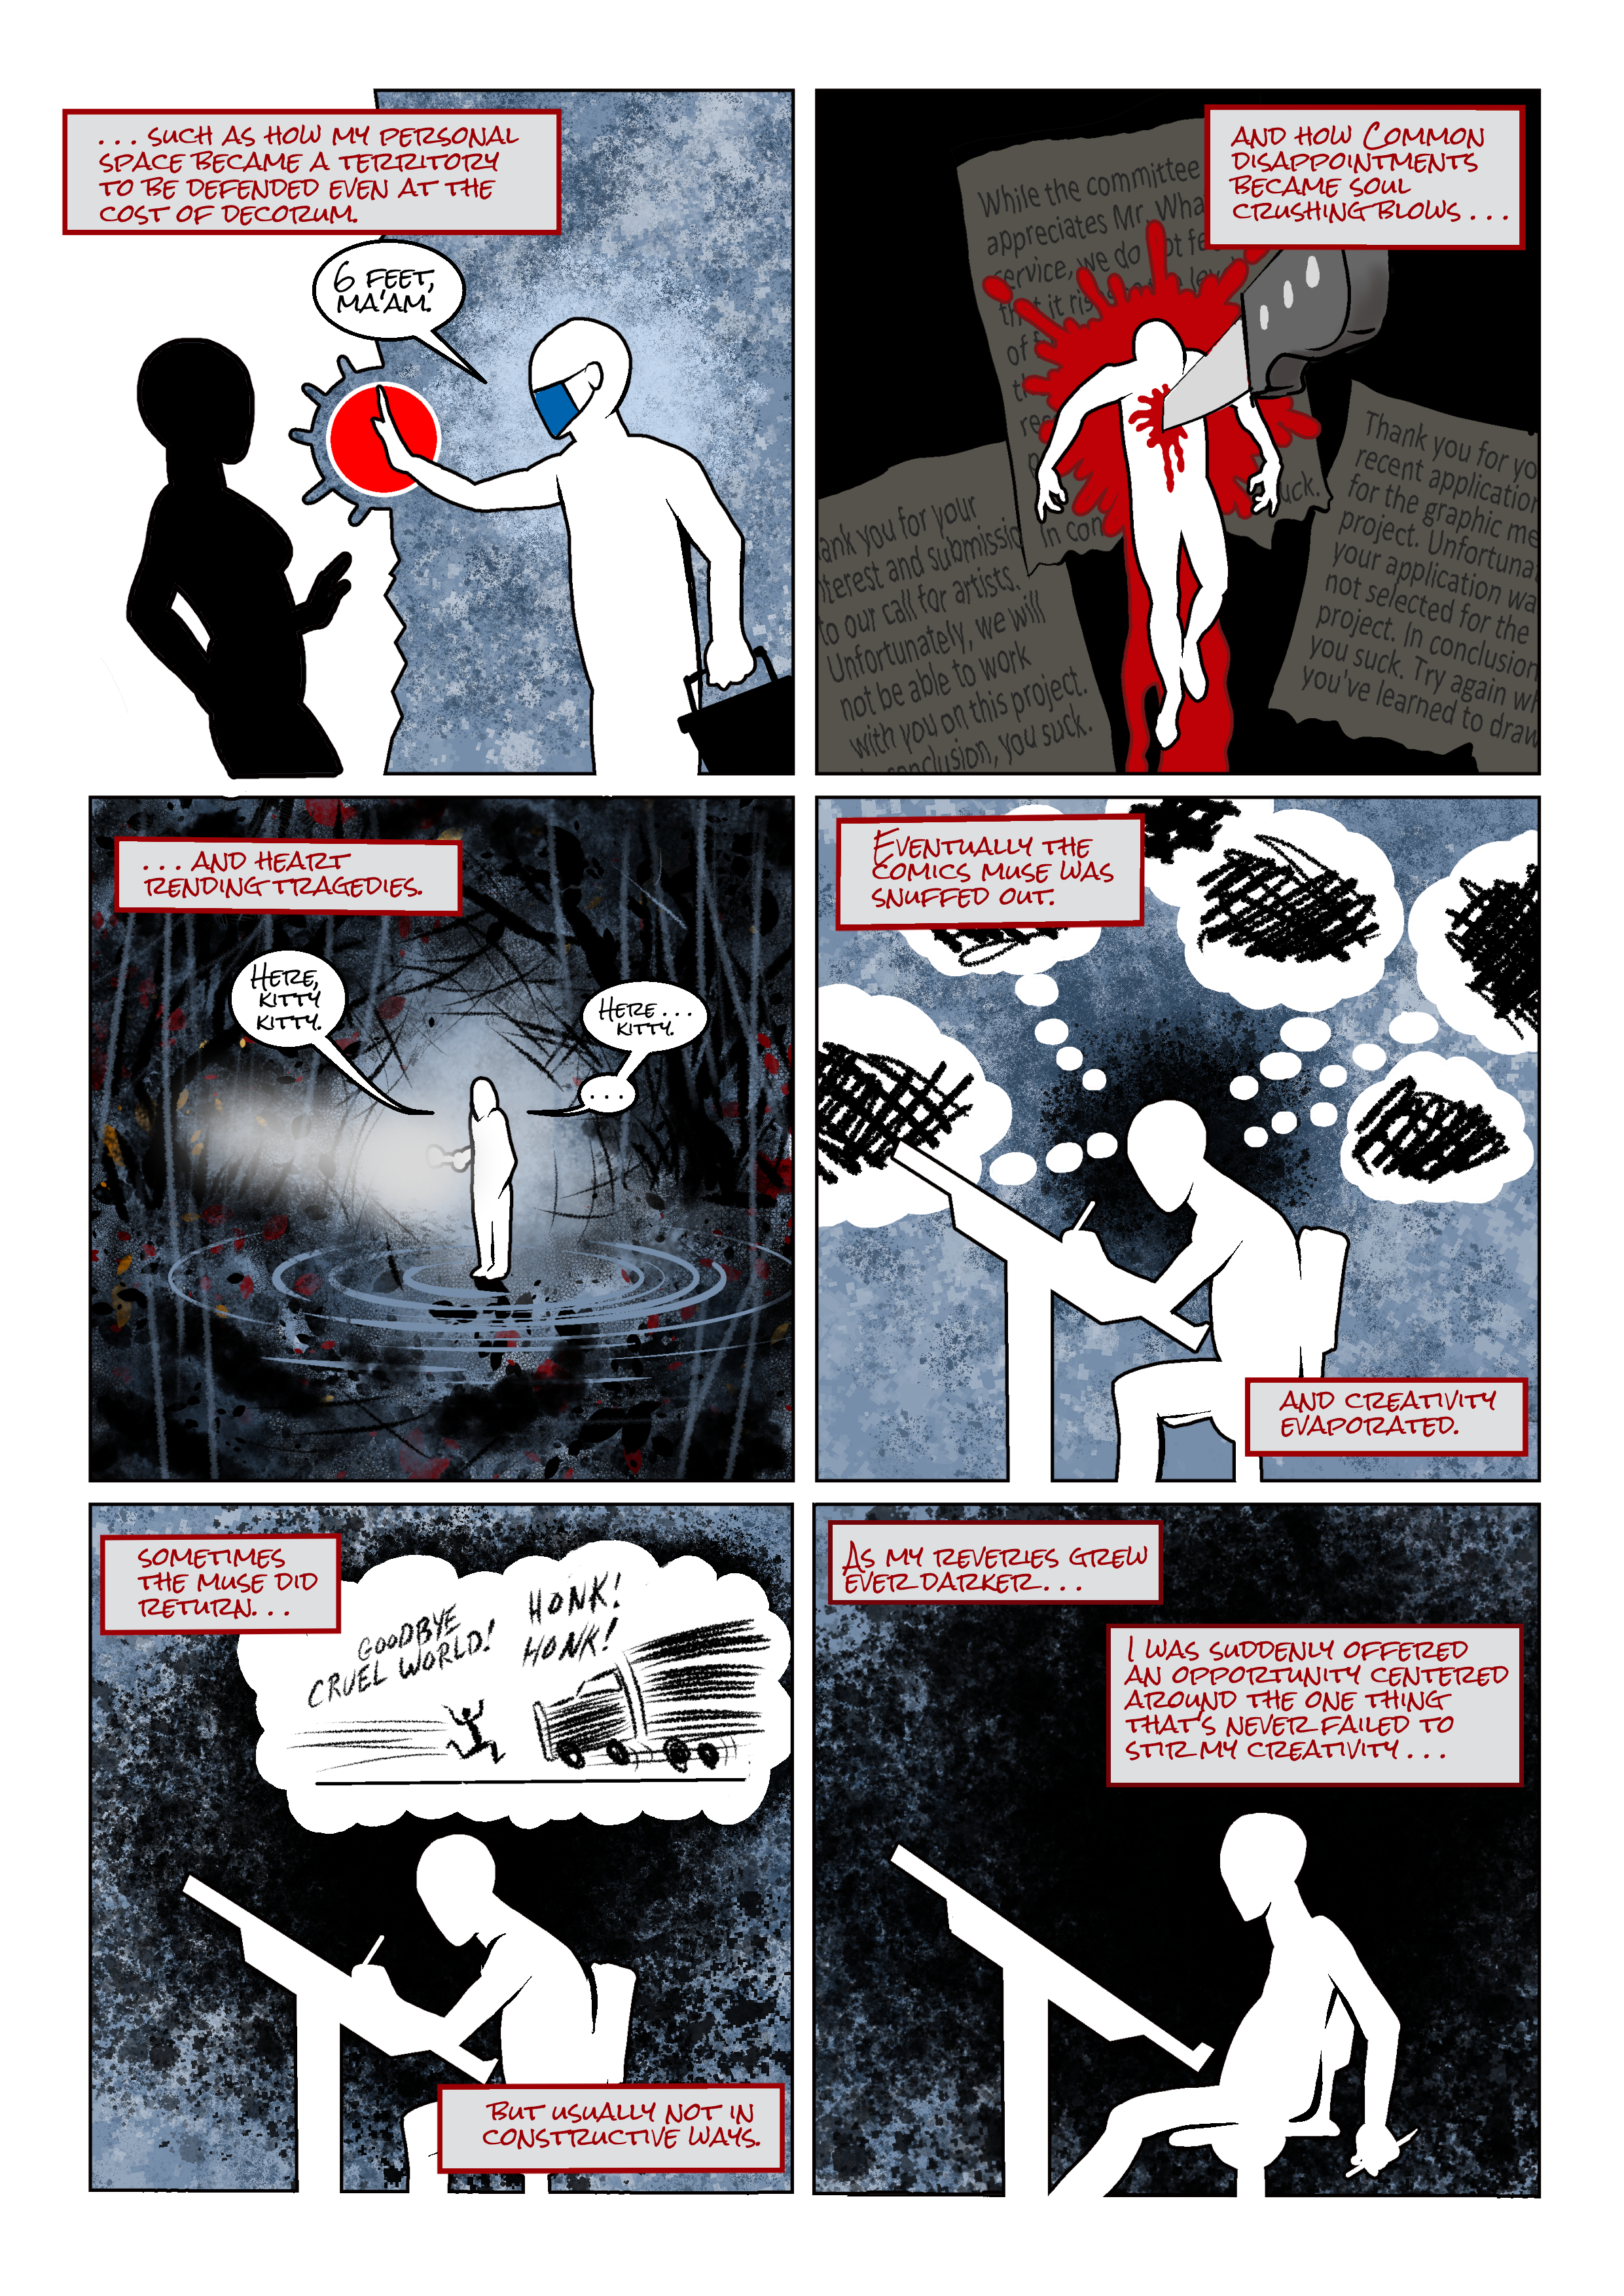 Drawing the Invisible: Comics as a Way of Depicting Psychological Responses to the Pandemic